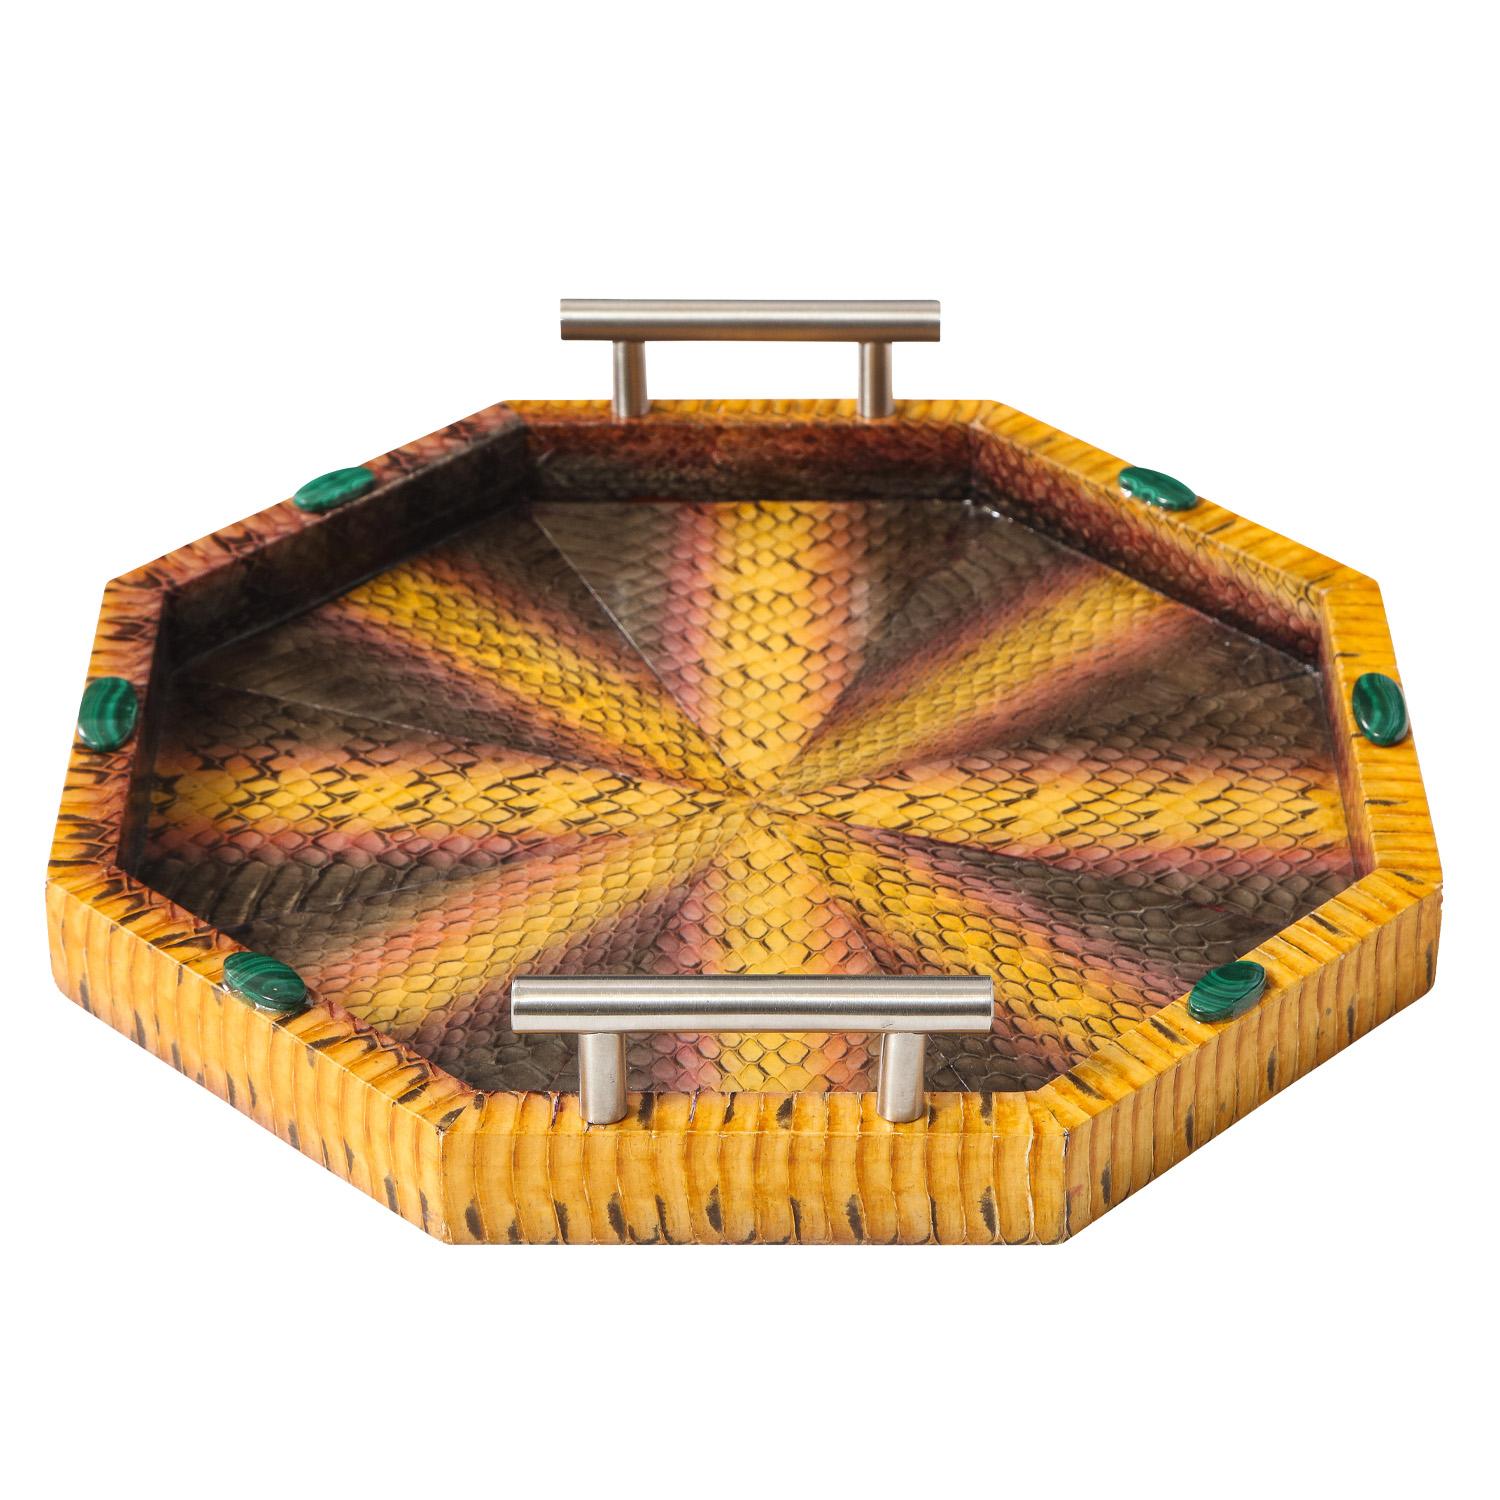 Modern Lobel Originals Octagonal Tray in Multicolor Python with Malachite Accents - New For Sale